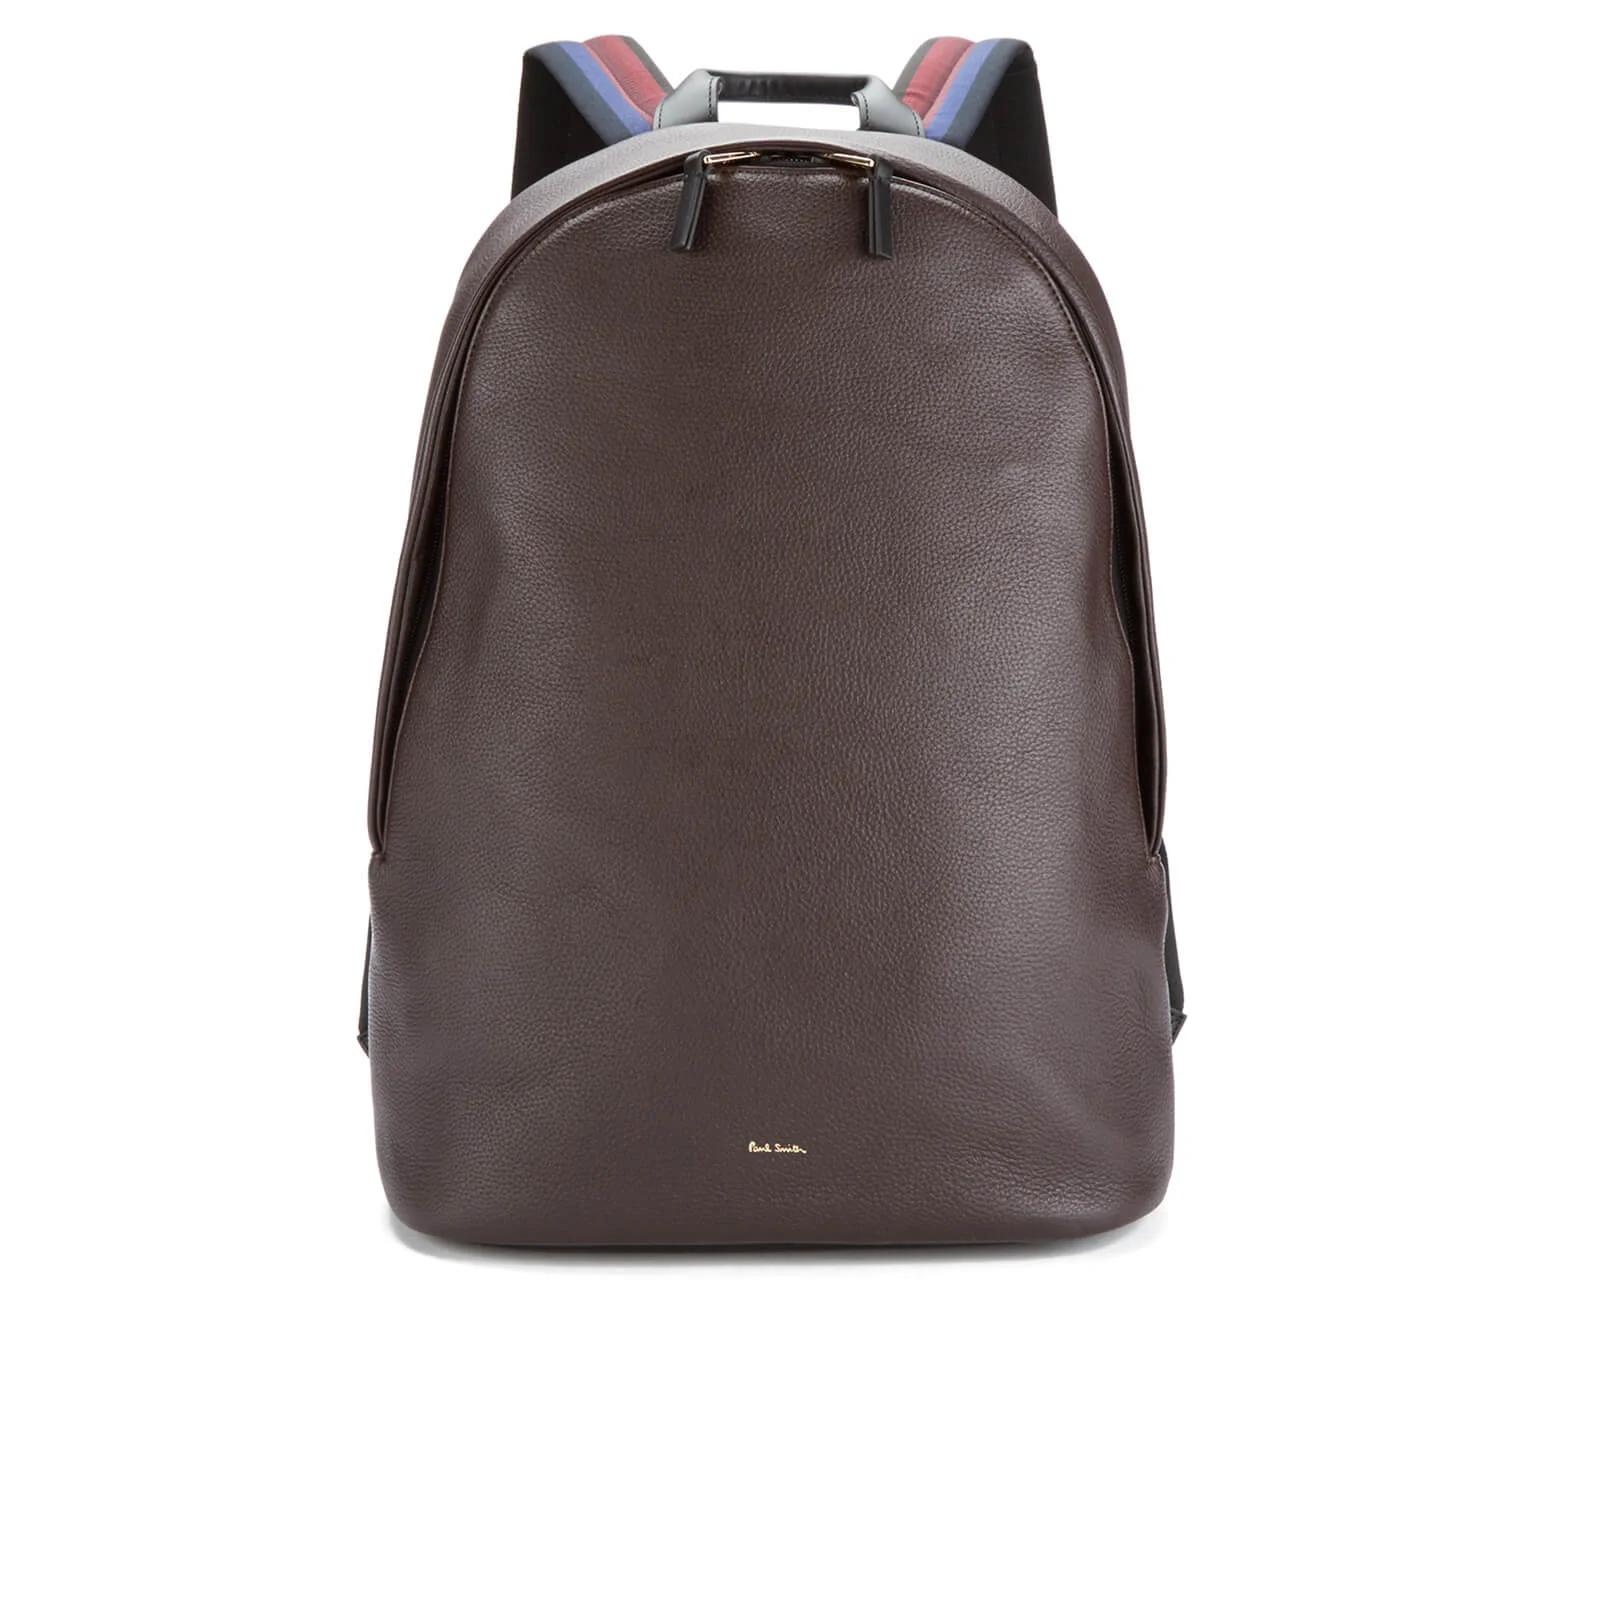 Paul Smith Accessories Men's City Web Backpack - Chocolate Image 1